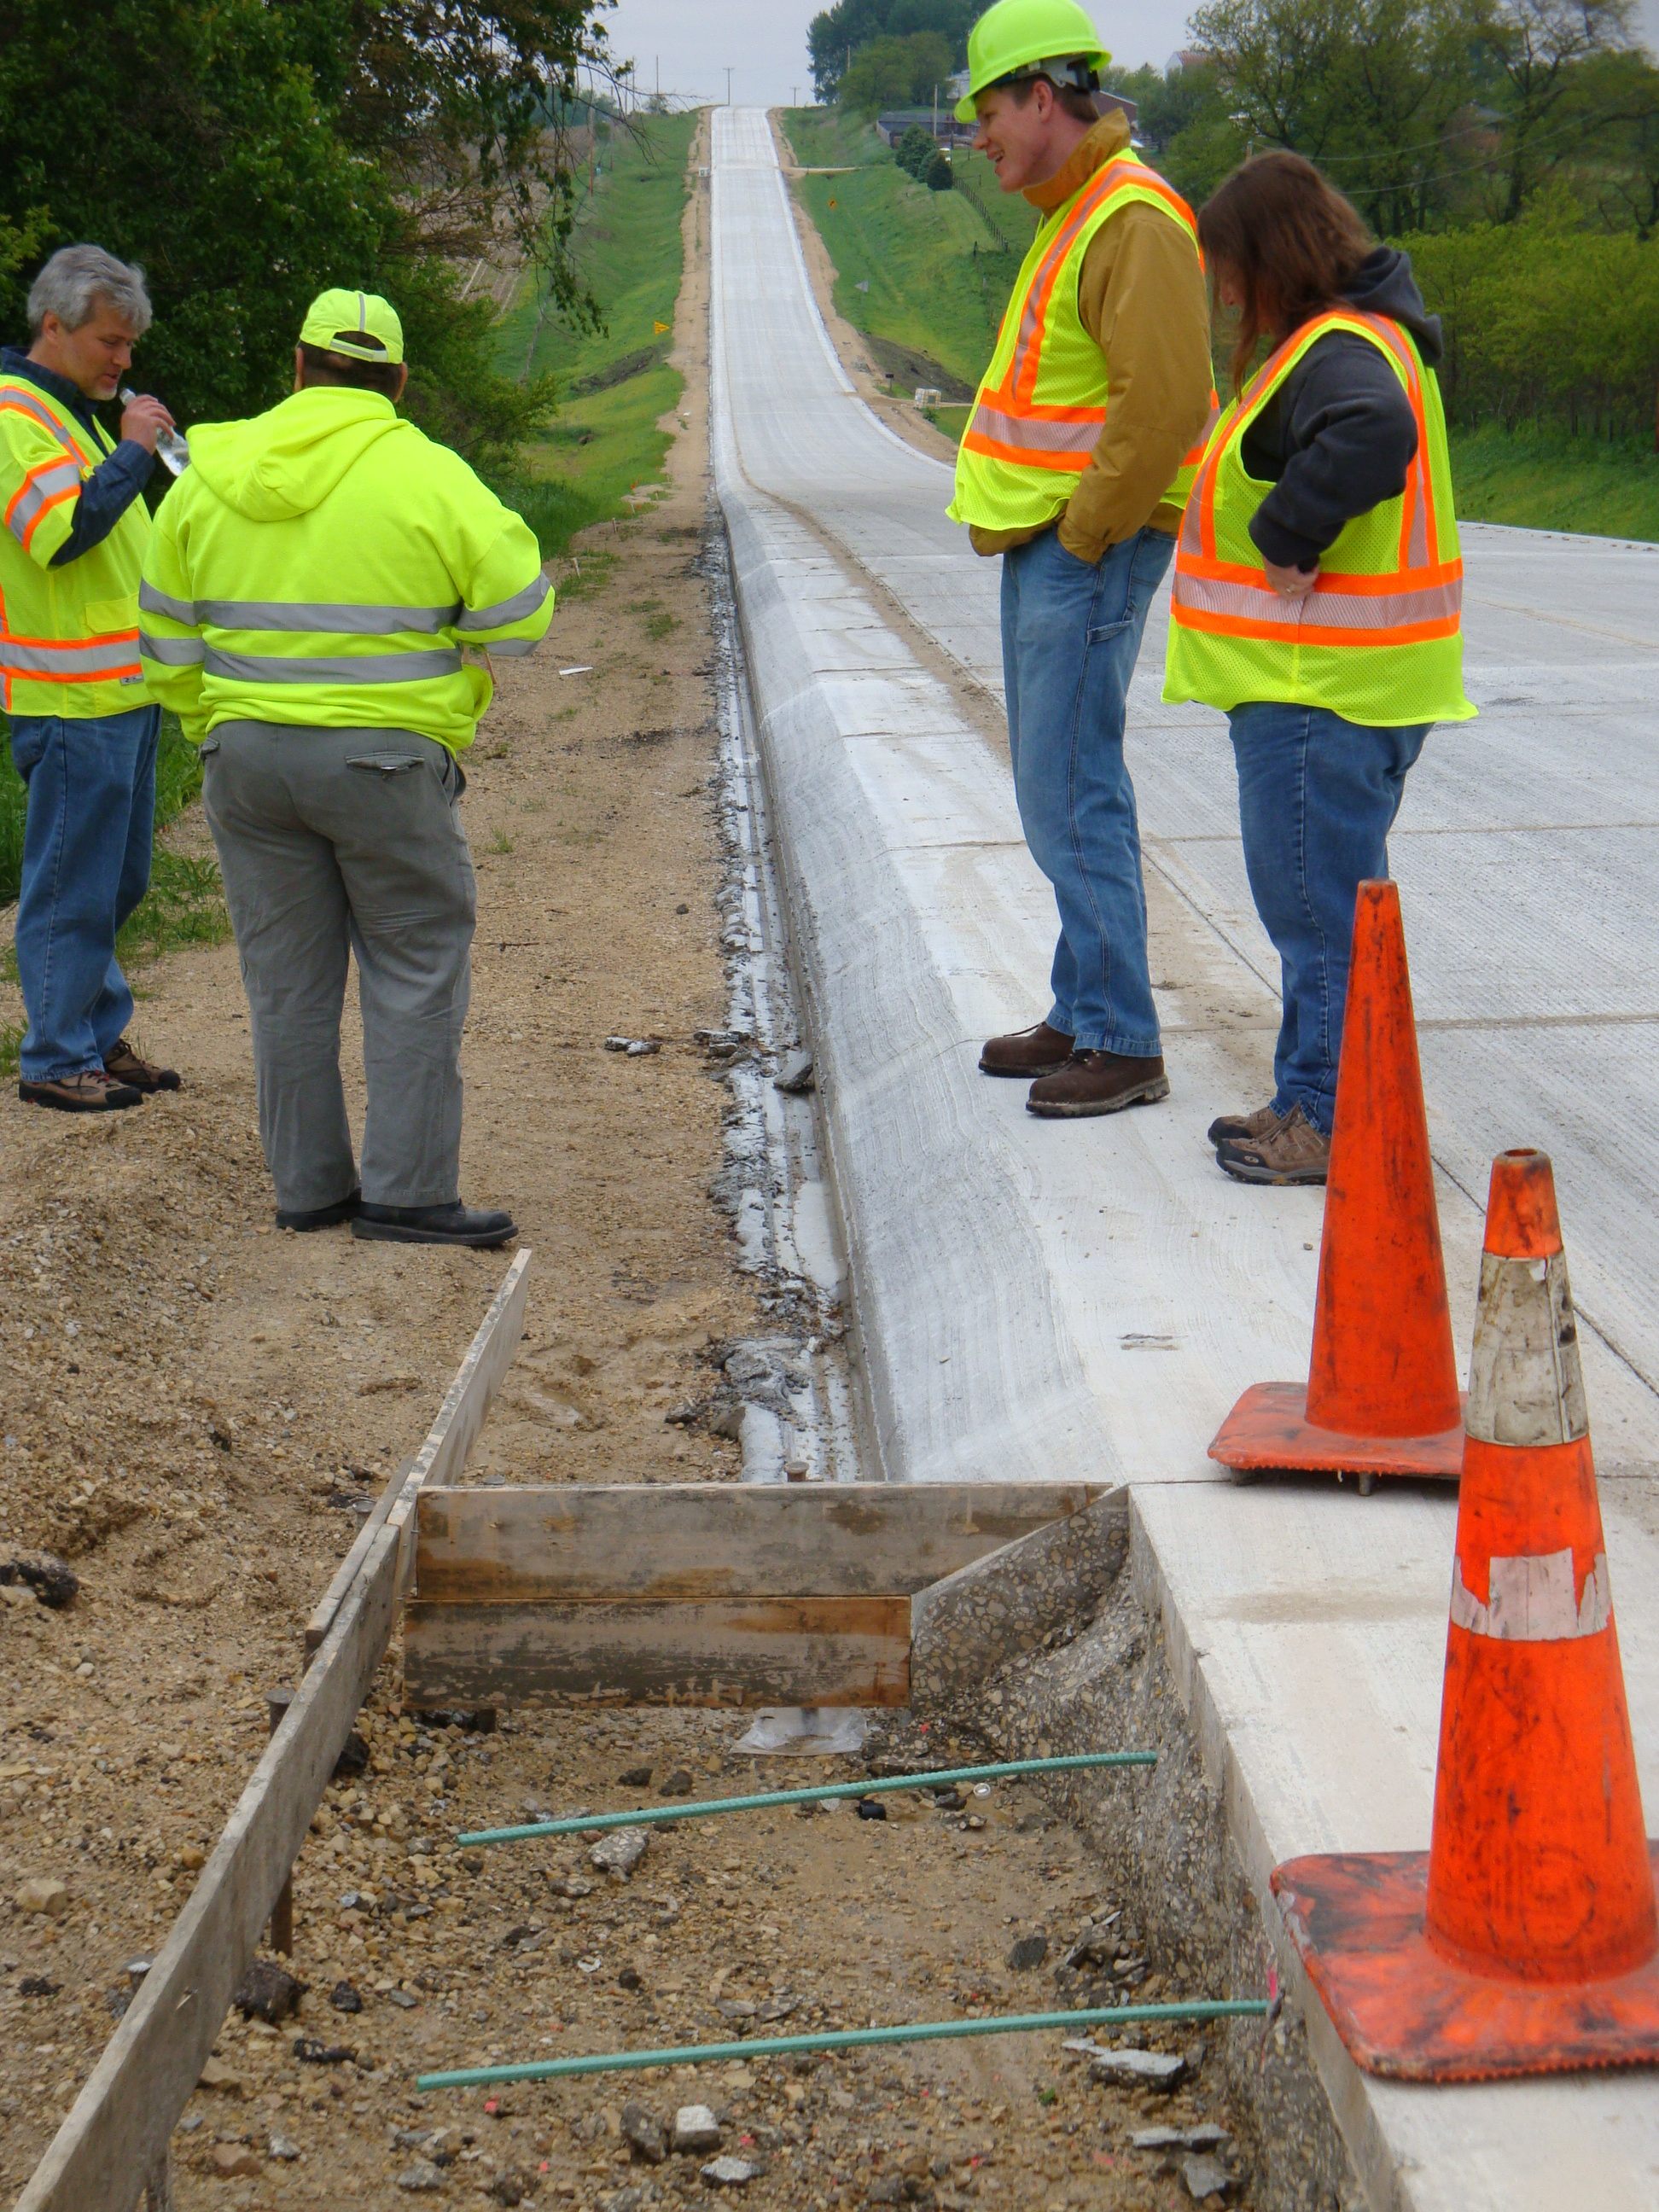 Pavement construction using a concrete overlay in Iowa.